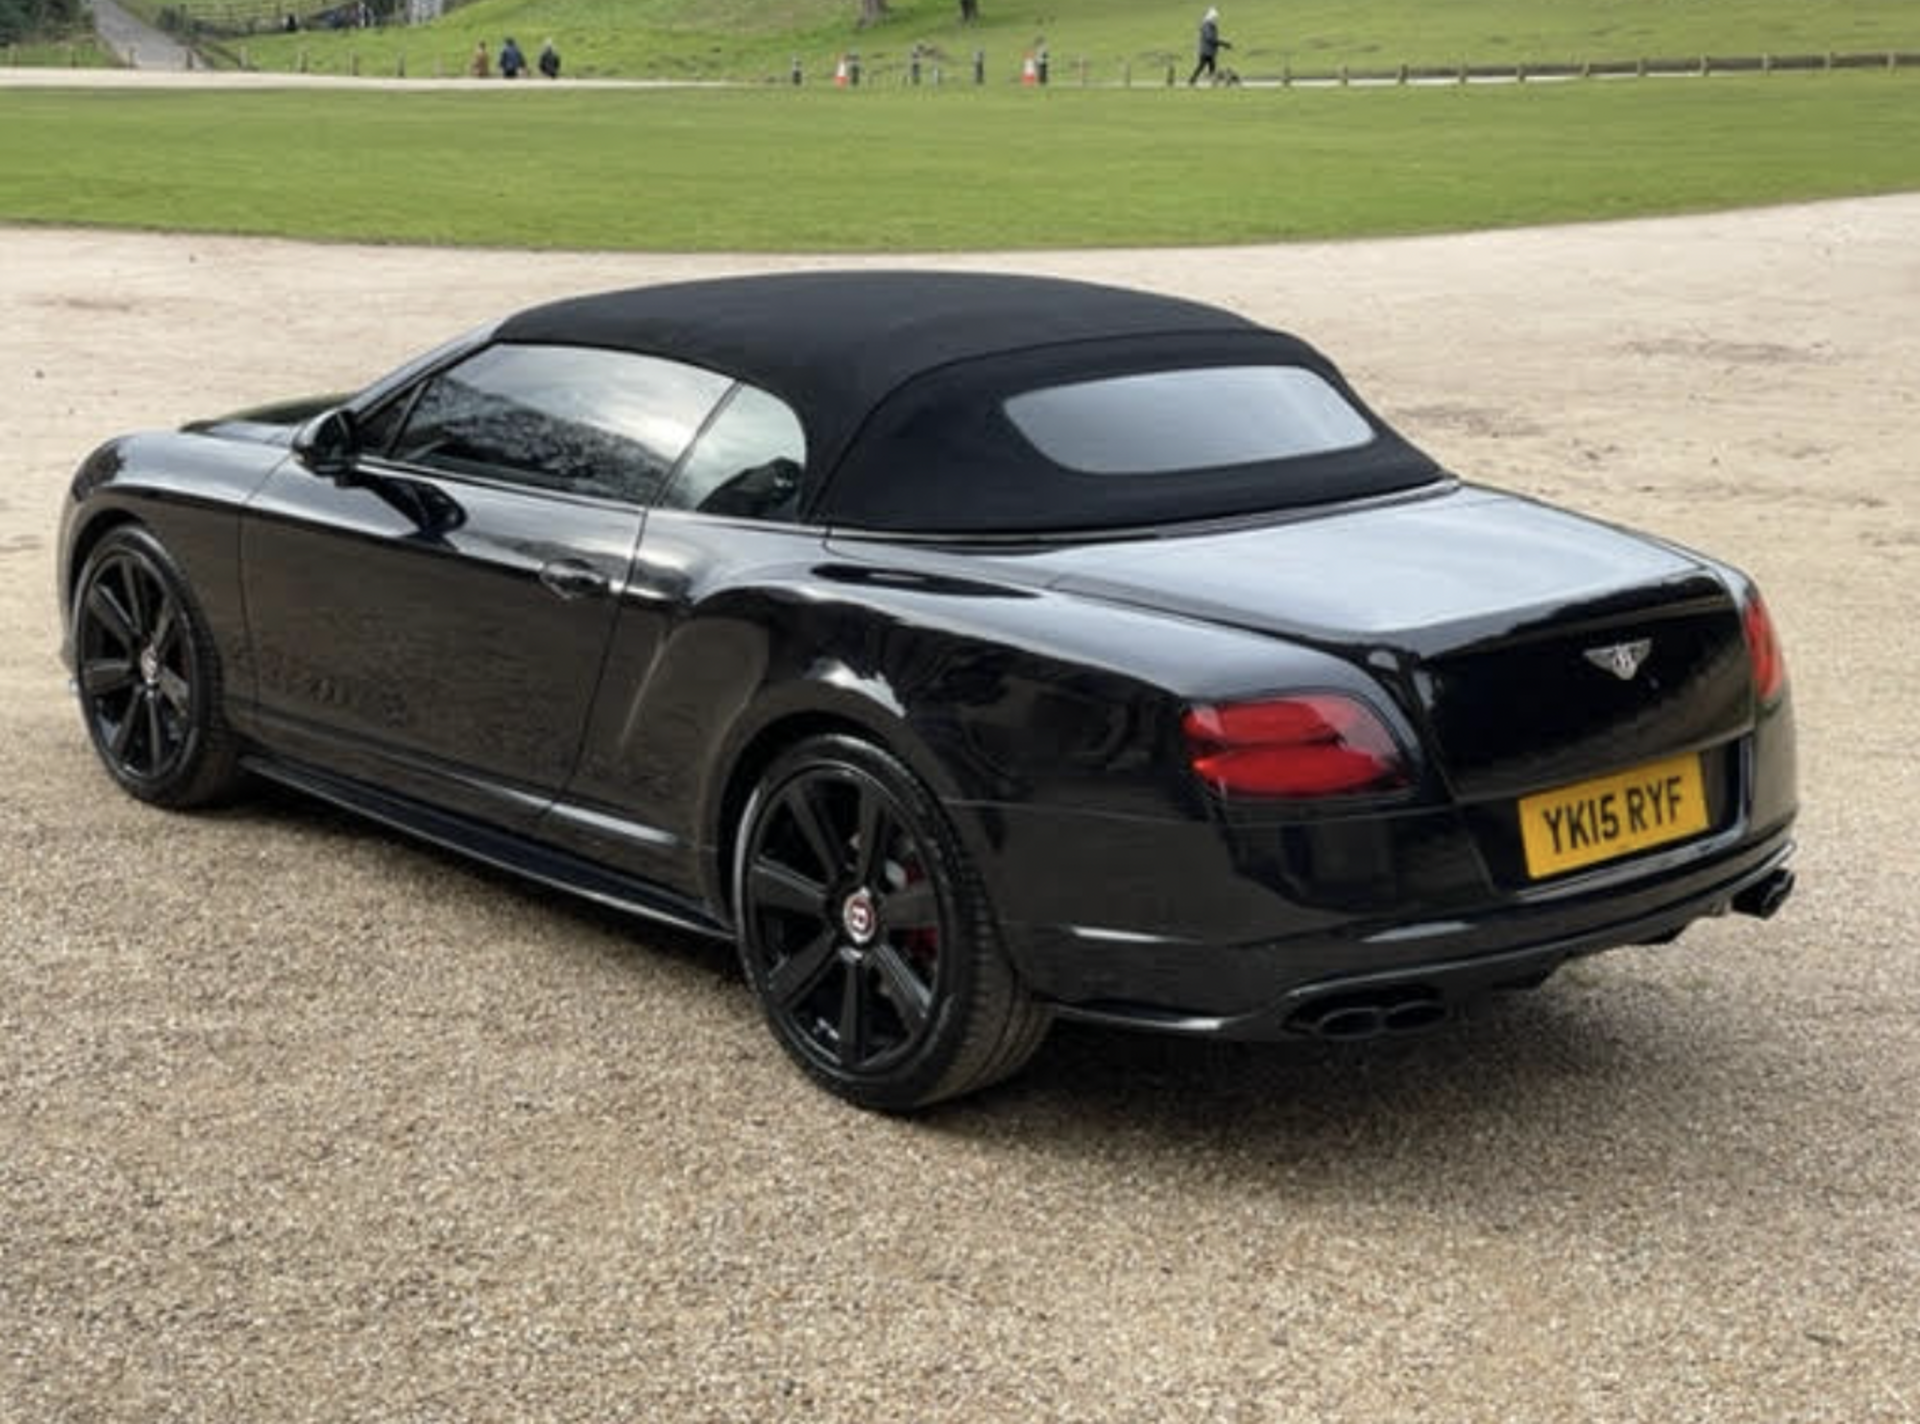 2015 Bentley Continental GTC 4.0 V8 S 2dr Auto Concourse series - Black pack 58,000 miles Full S/H - Image 4 of 18